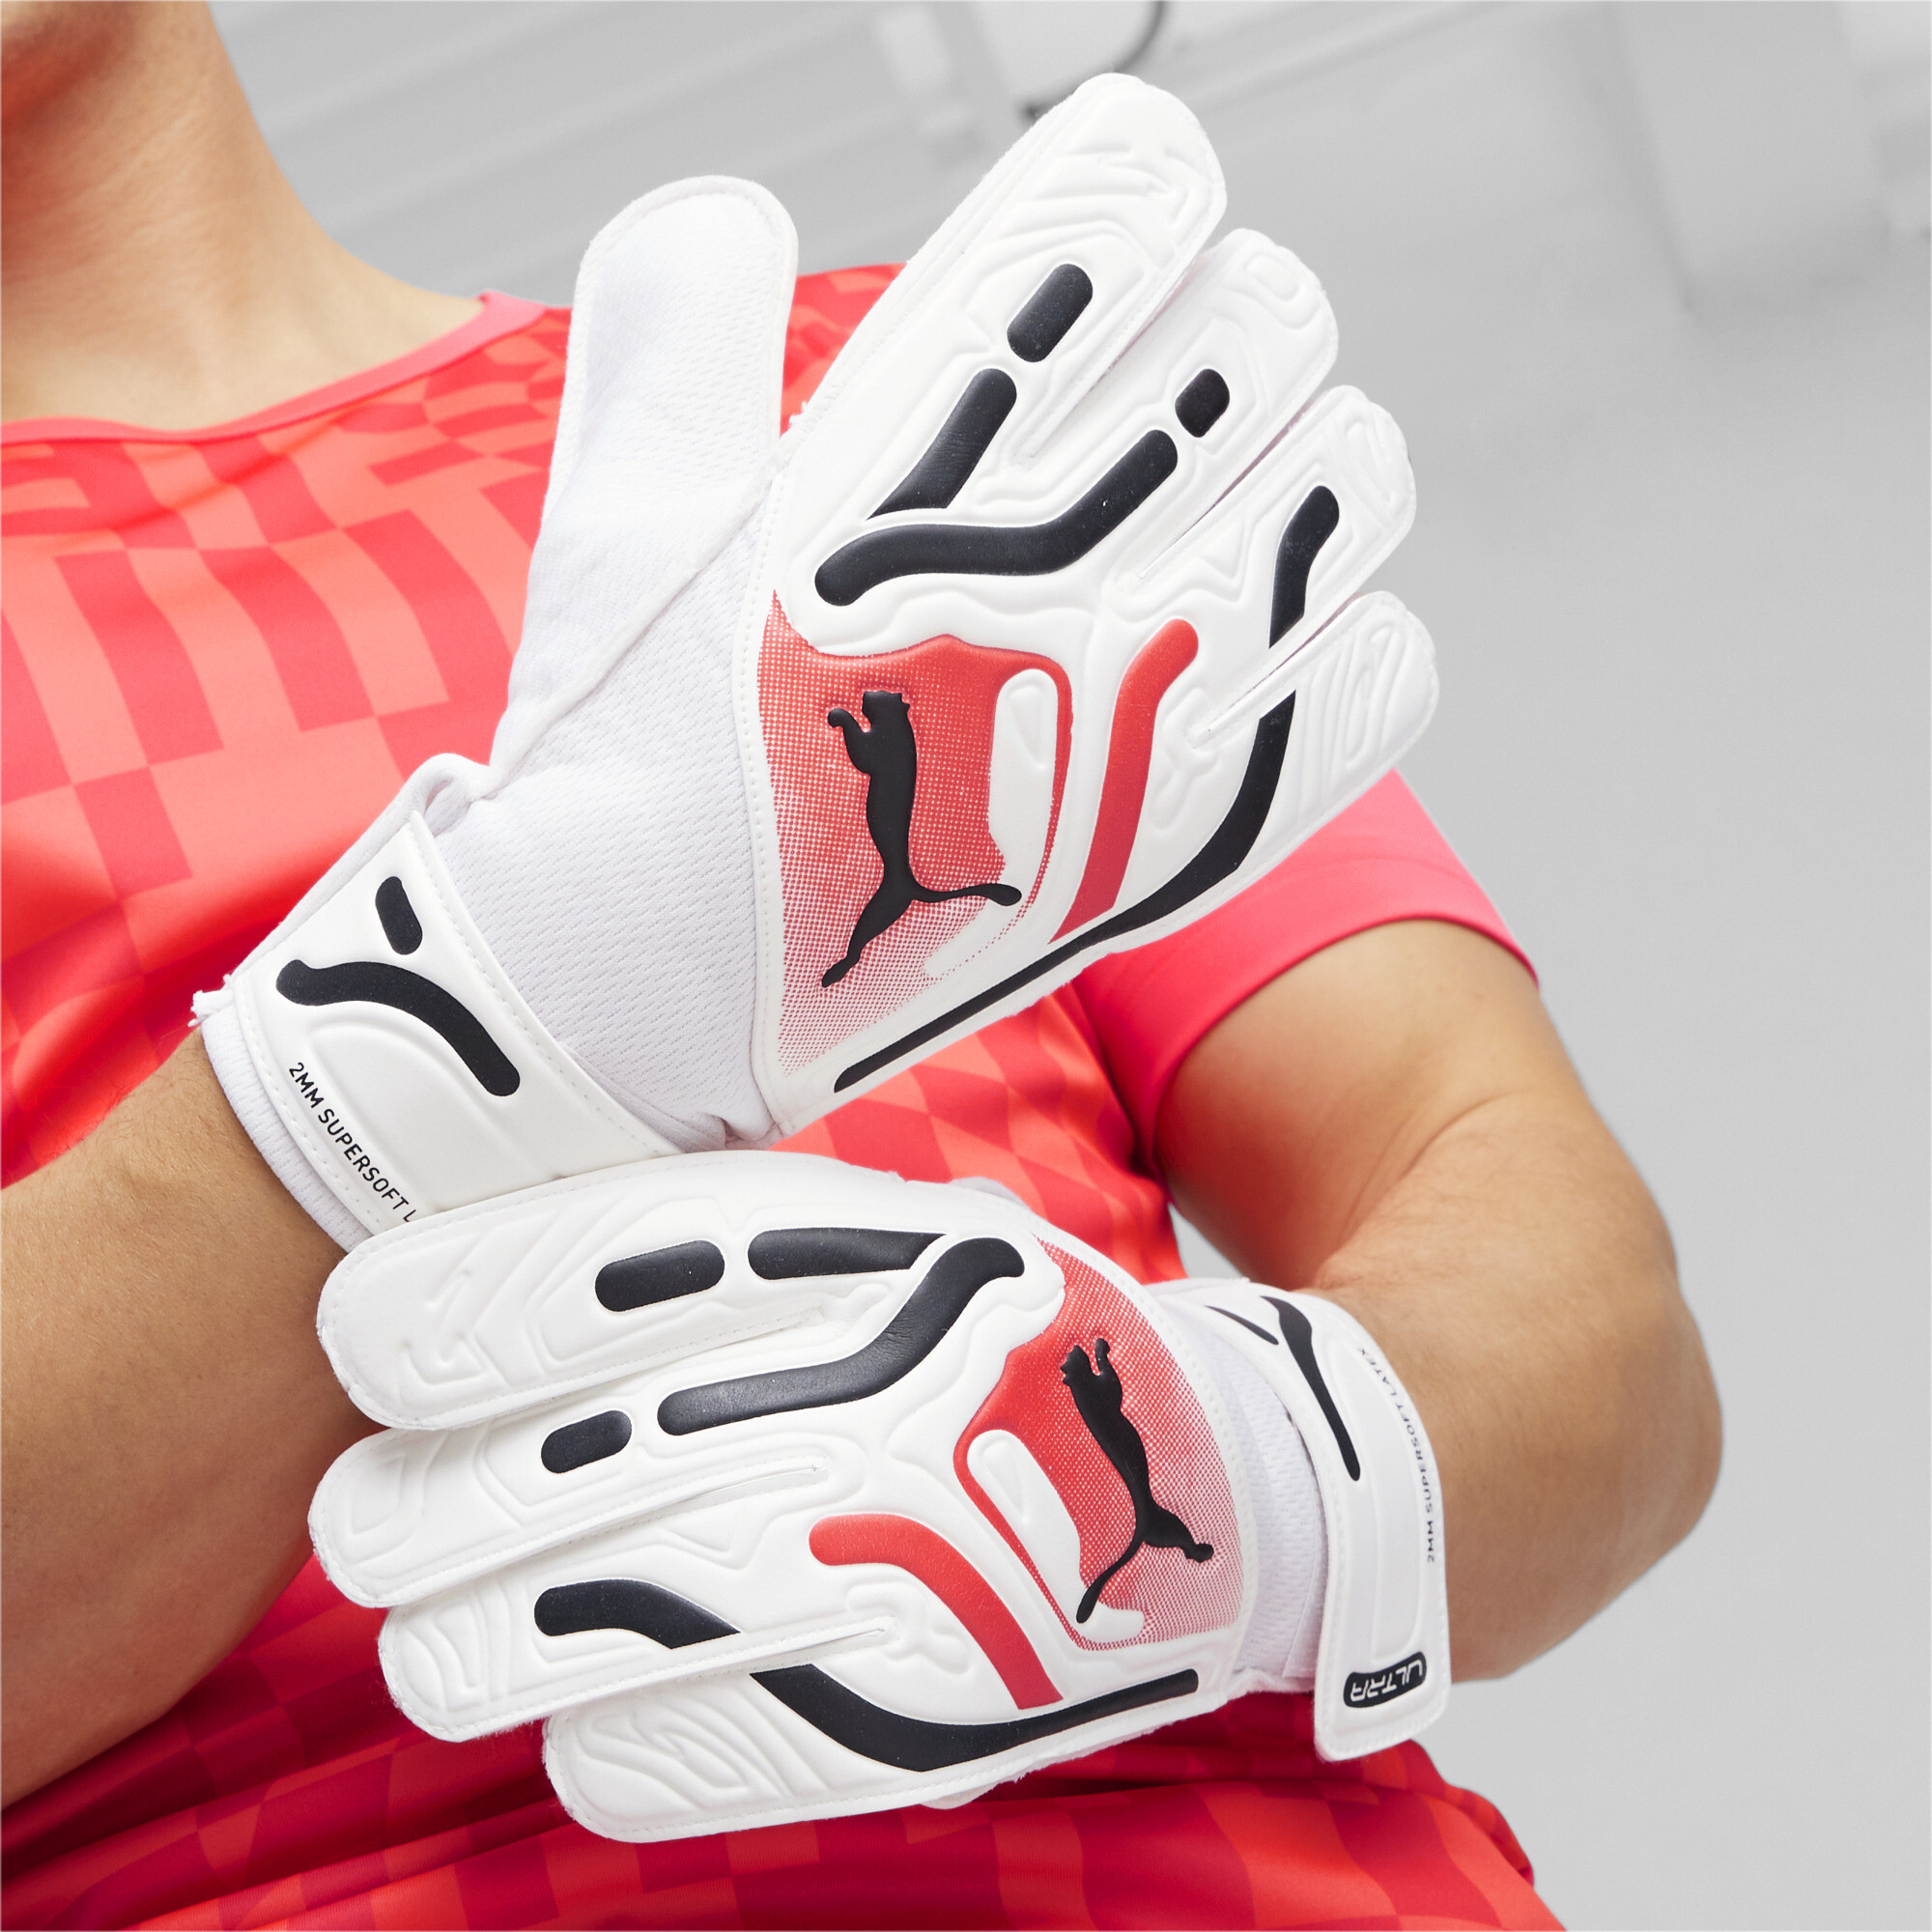 Puma ULTRA Play RC Goalkeeper Gloves, White, Size 10, Accessories